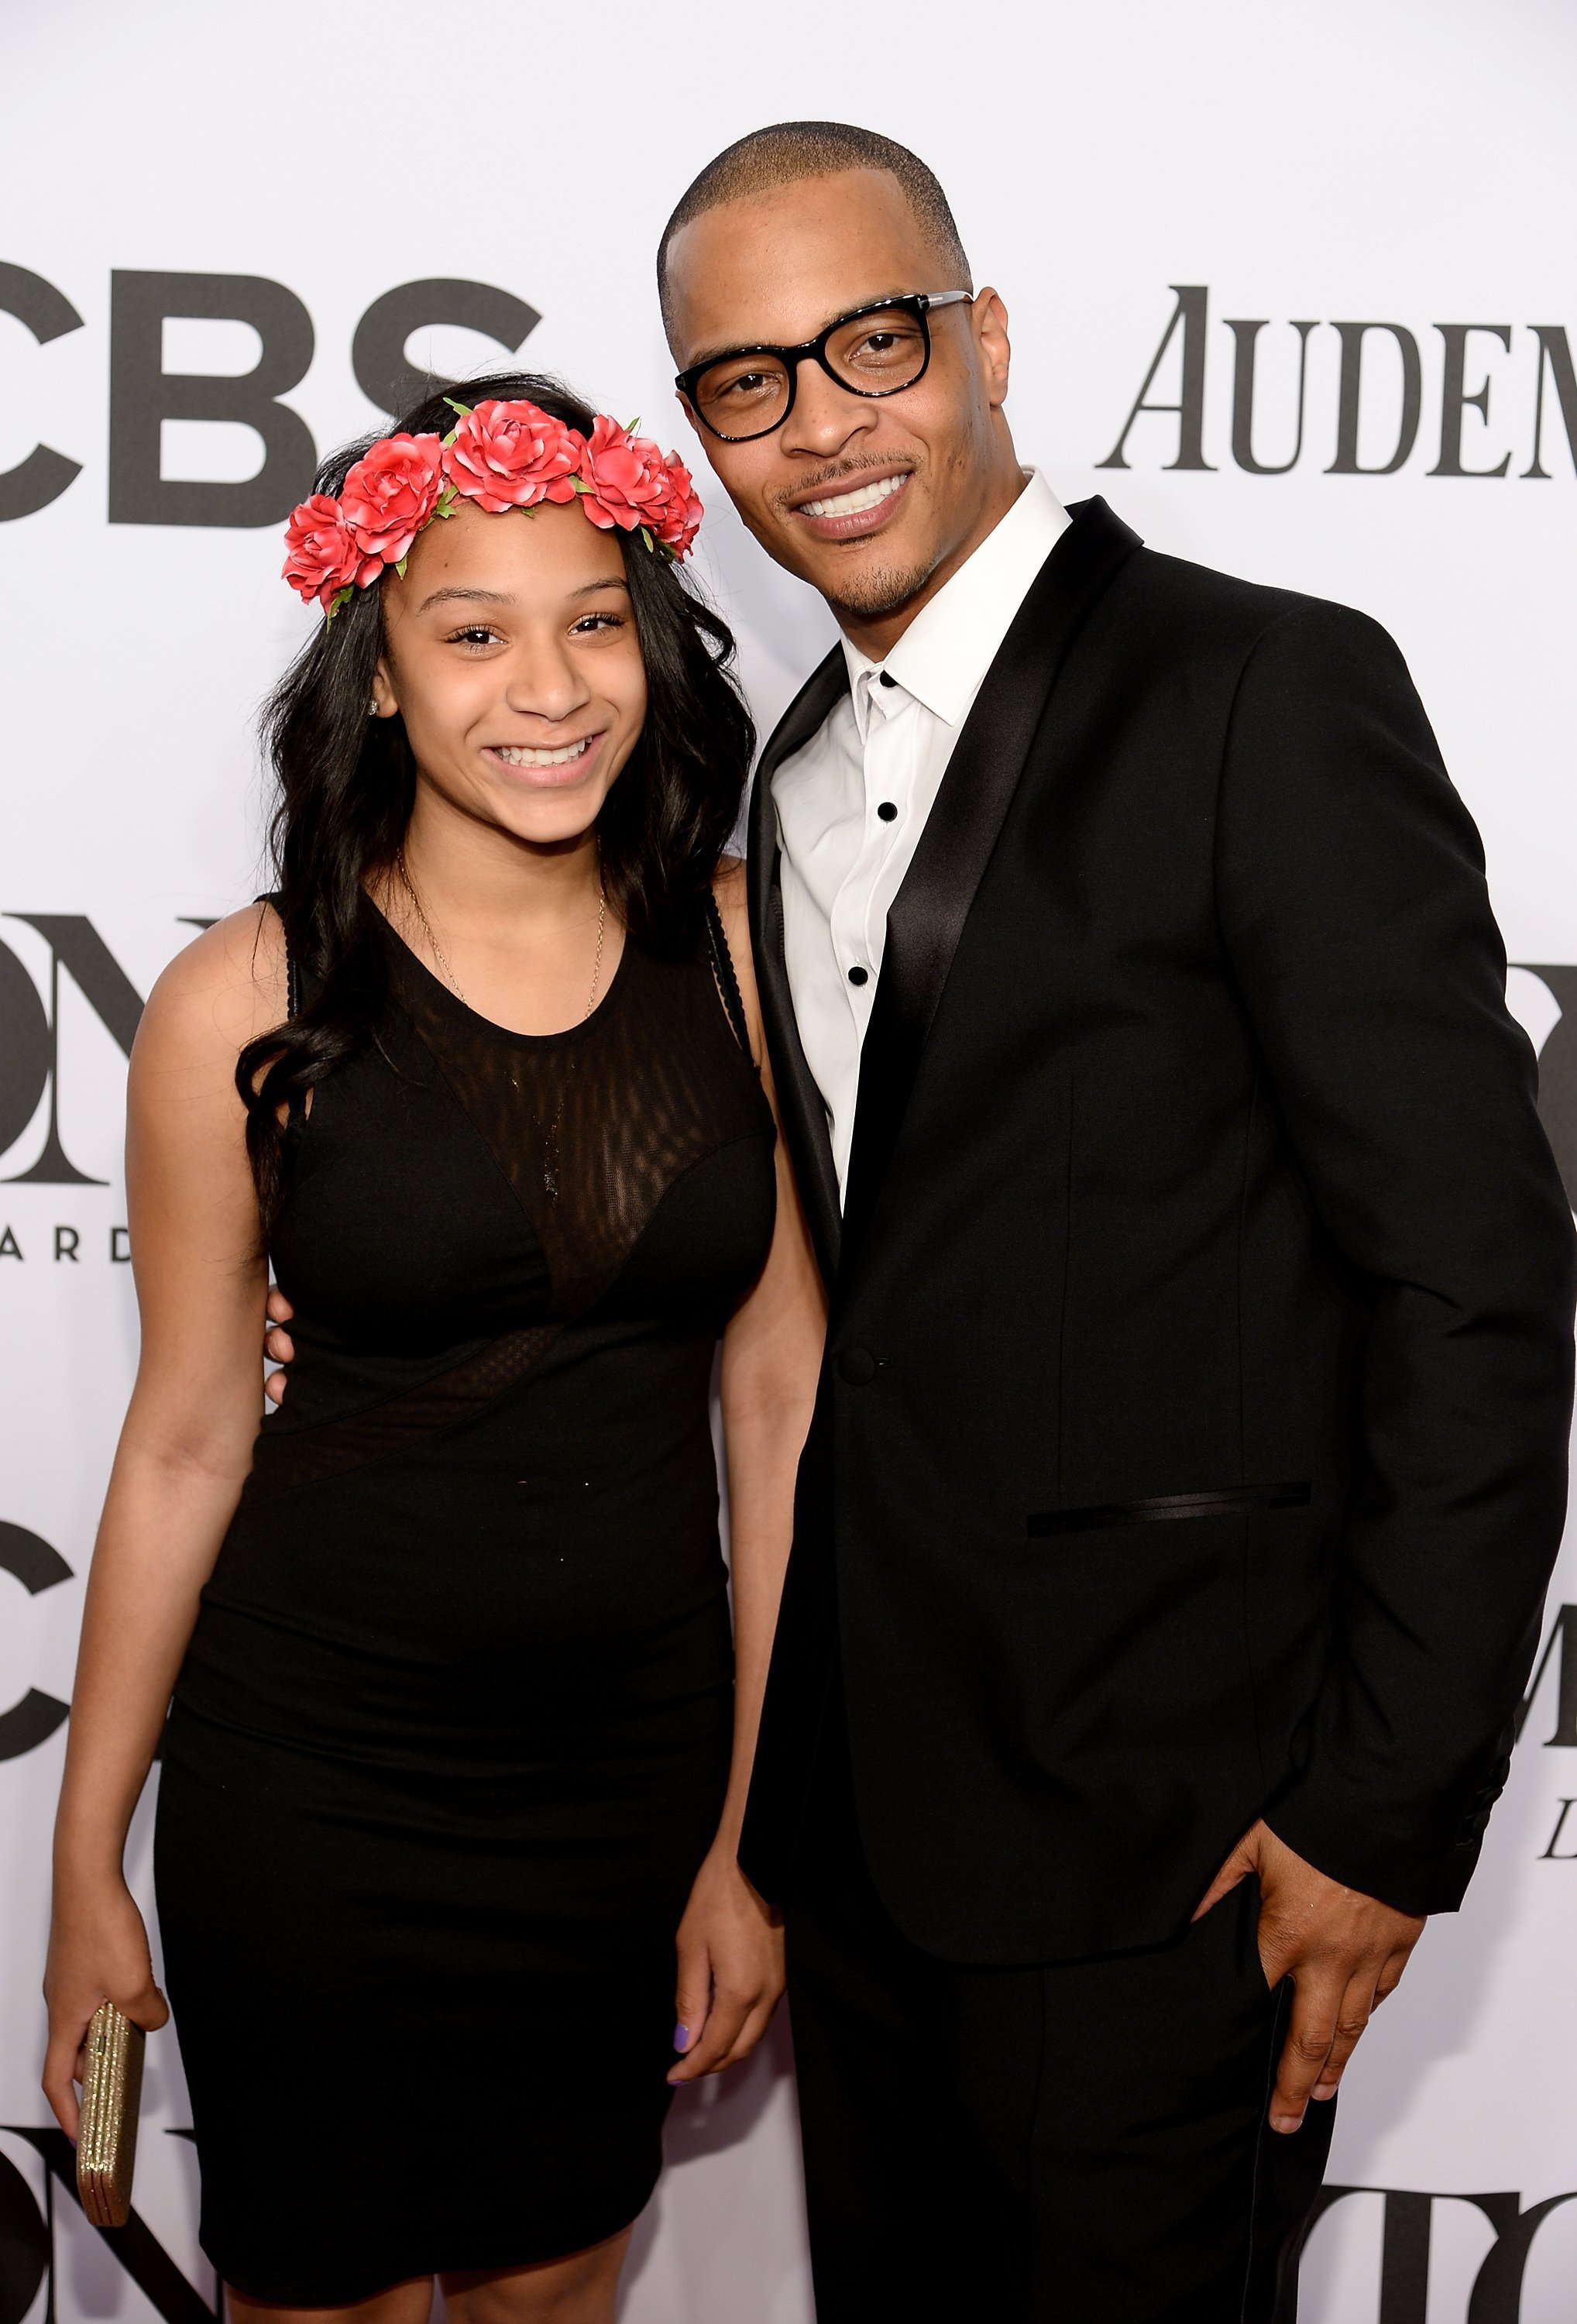 Deyjah Imani Harris & T.I. at the 68th Annual Tony Awards on June 8, 2014 in New York City | Photo: Getty Images